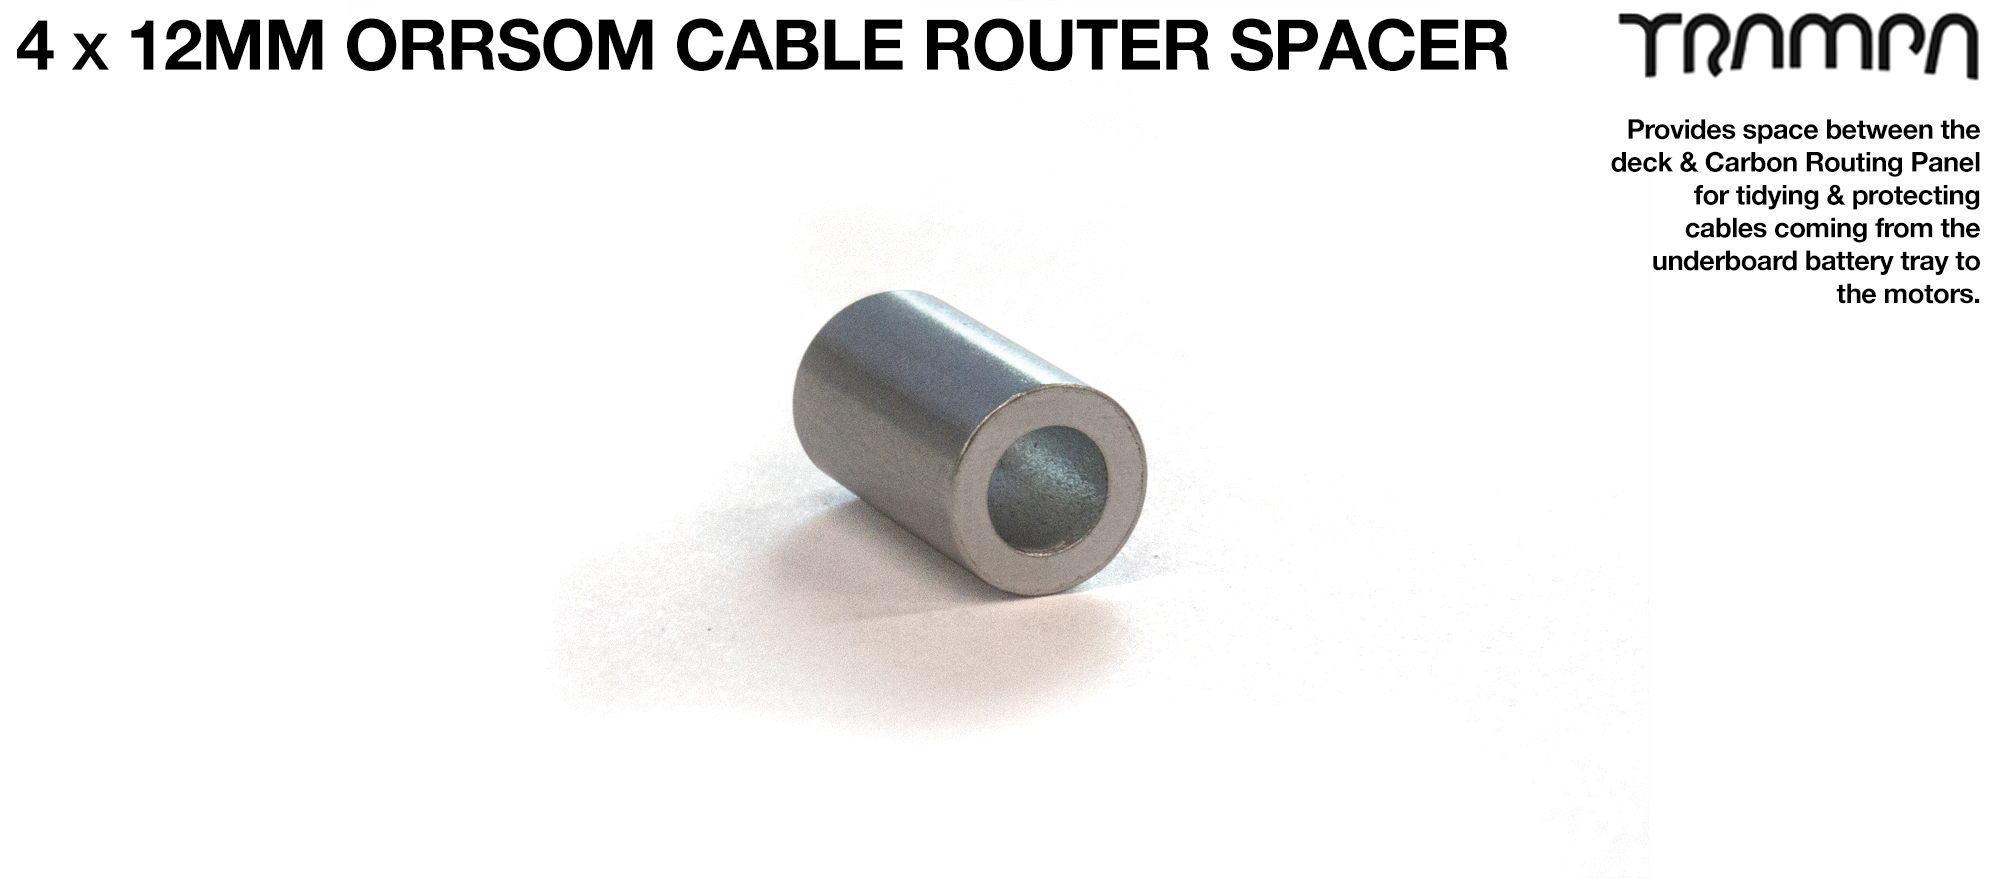 4 x 12mm Orrsom Cable Router Spacer - for providing space to route the cables under the carbon panel